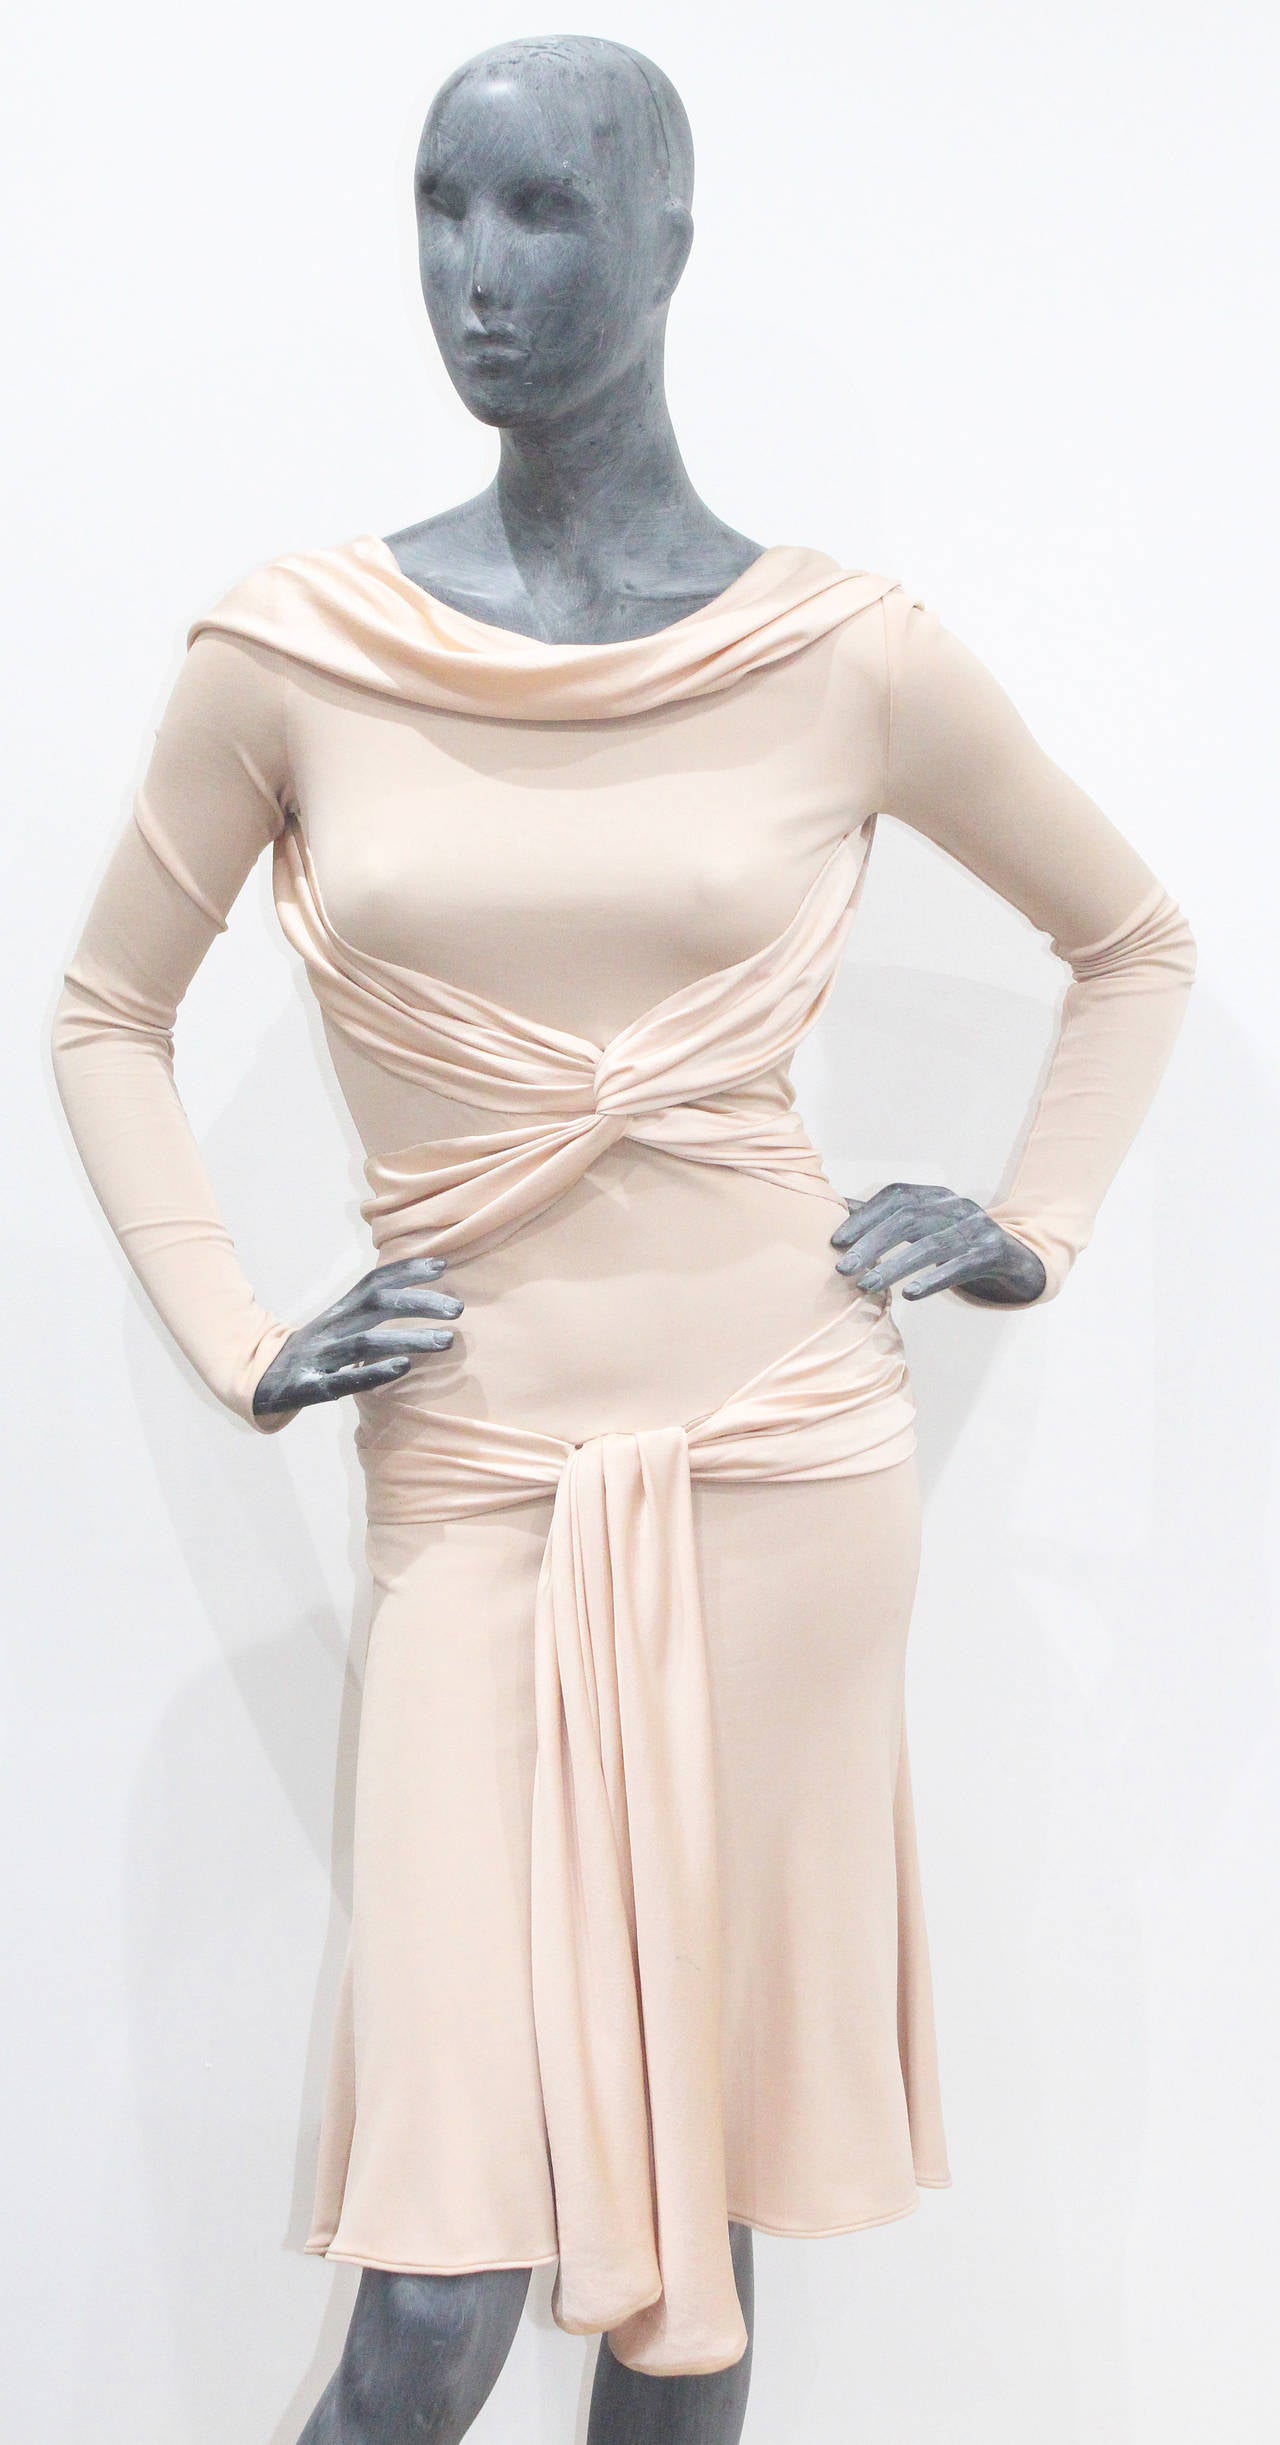 A fine and rare Alexander McQueen runway dress from the 'PANTHEON AS LECUM' Autumn/Winter 2004 collection. The dress is in a stretch nude/peach colour and has silk ties wrapping around the body. This dress definitely has a 1930s influence to it and